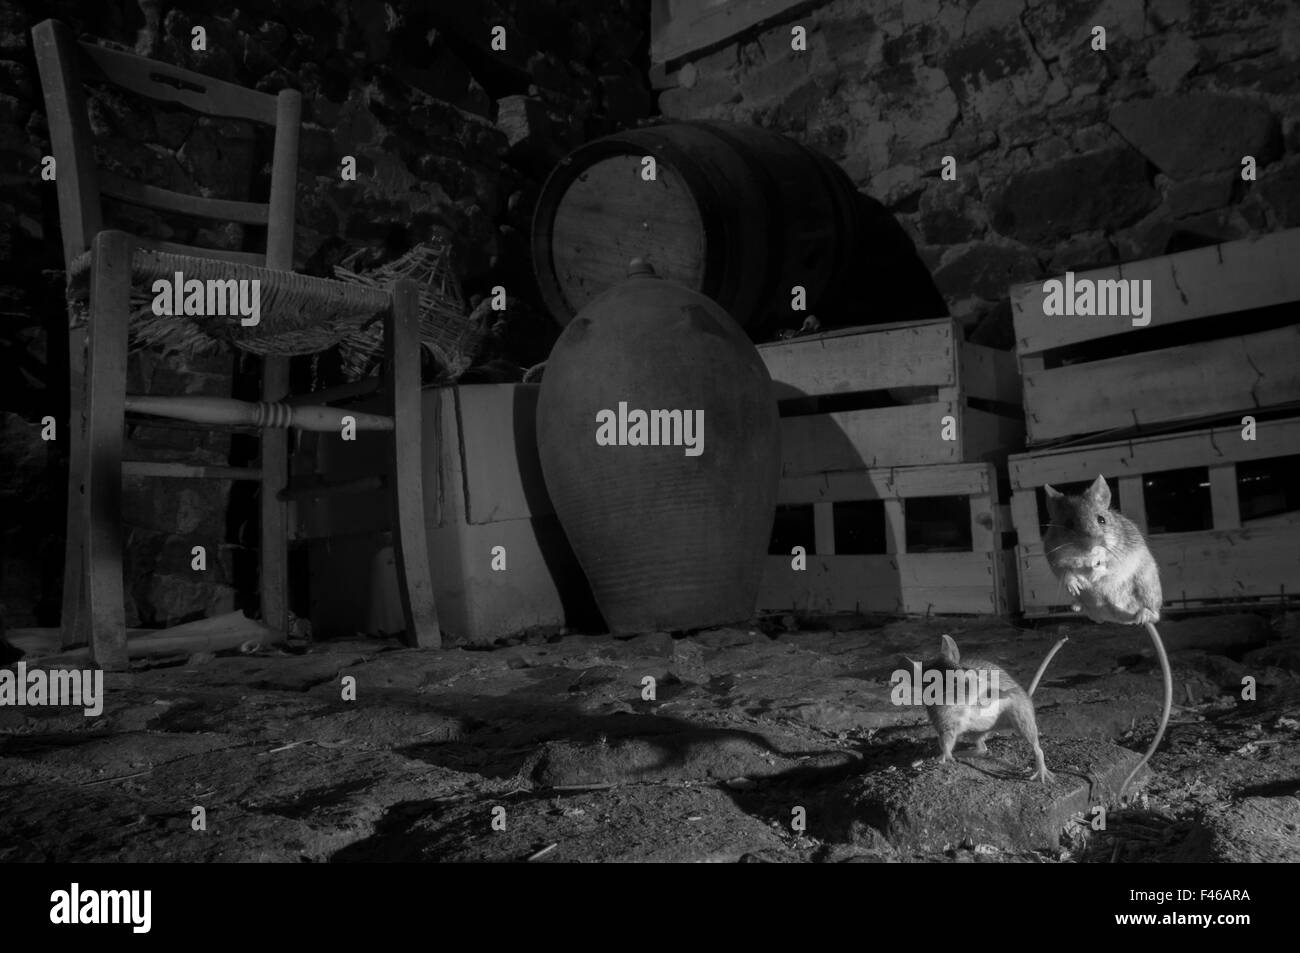 House Mice Mus Musculus Fighting In A Basement Taken At Night With Infra Red Remote Camera Trap